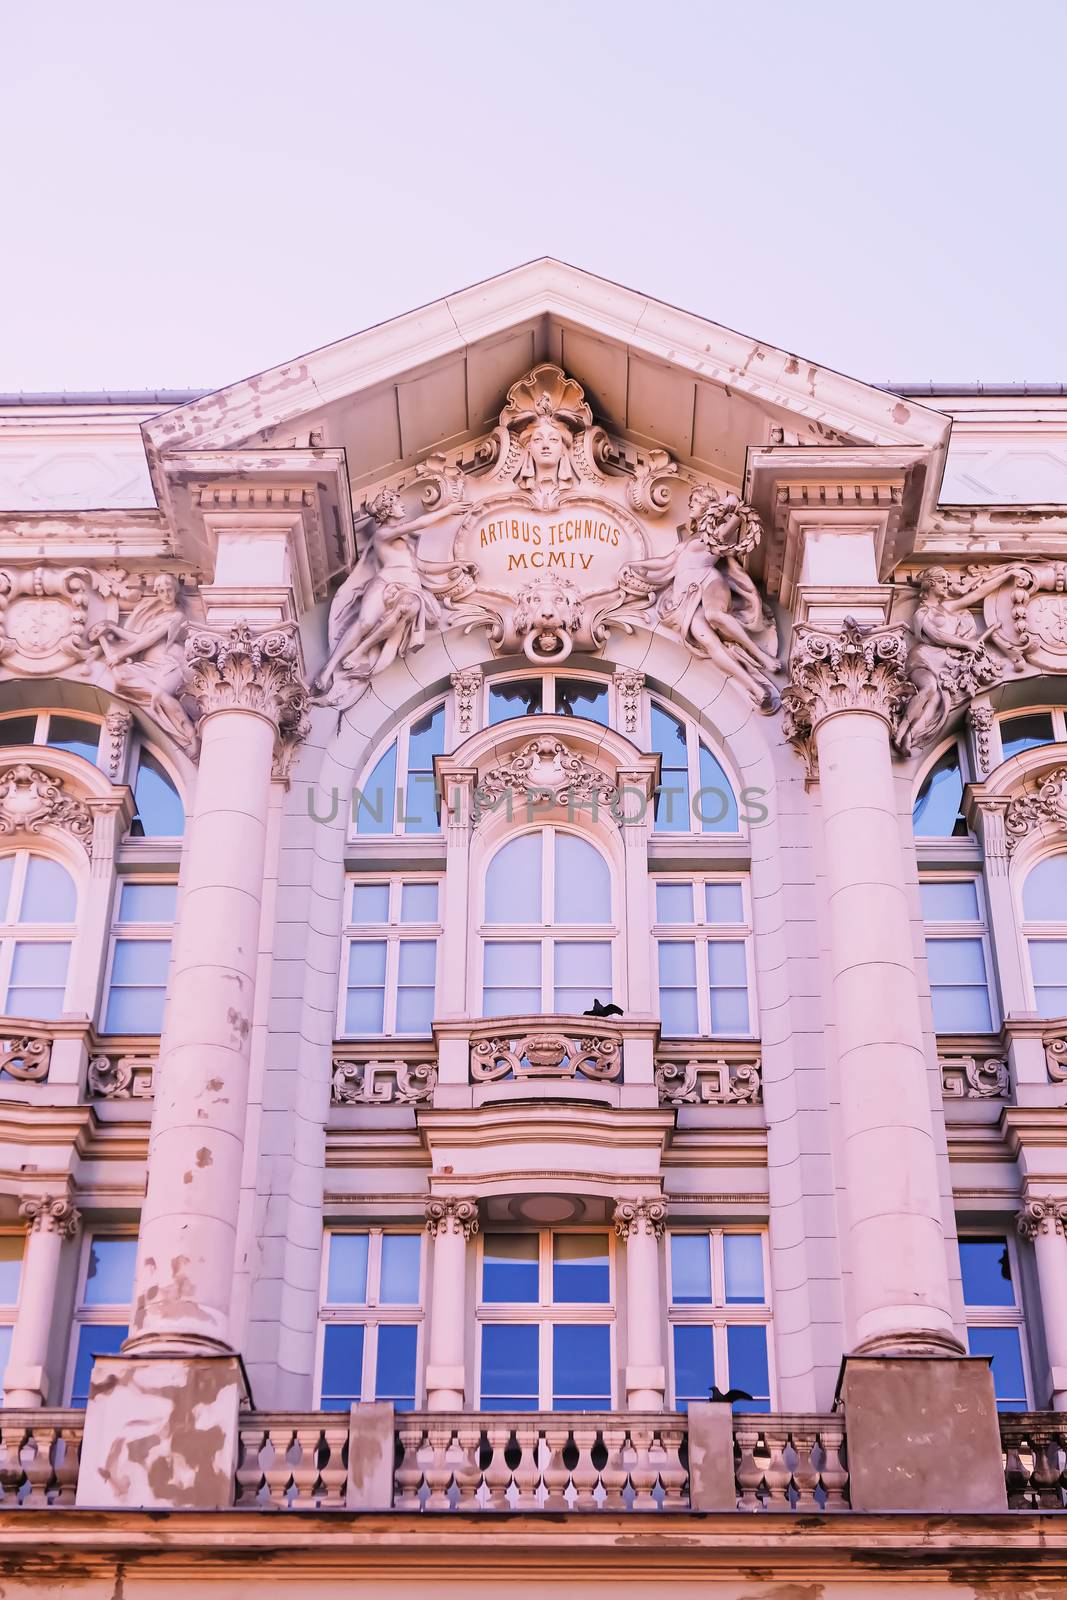 Exterior facade of classic building in the European city, architecture and design detail